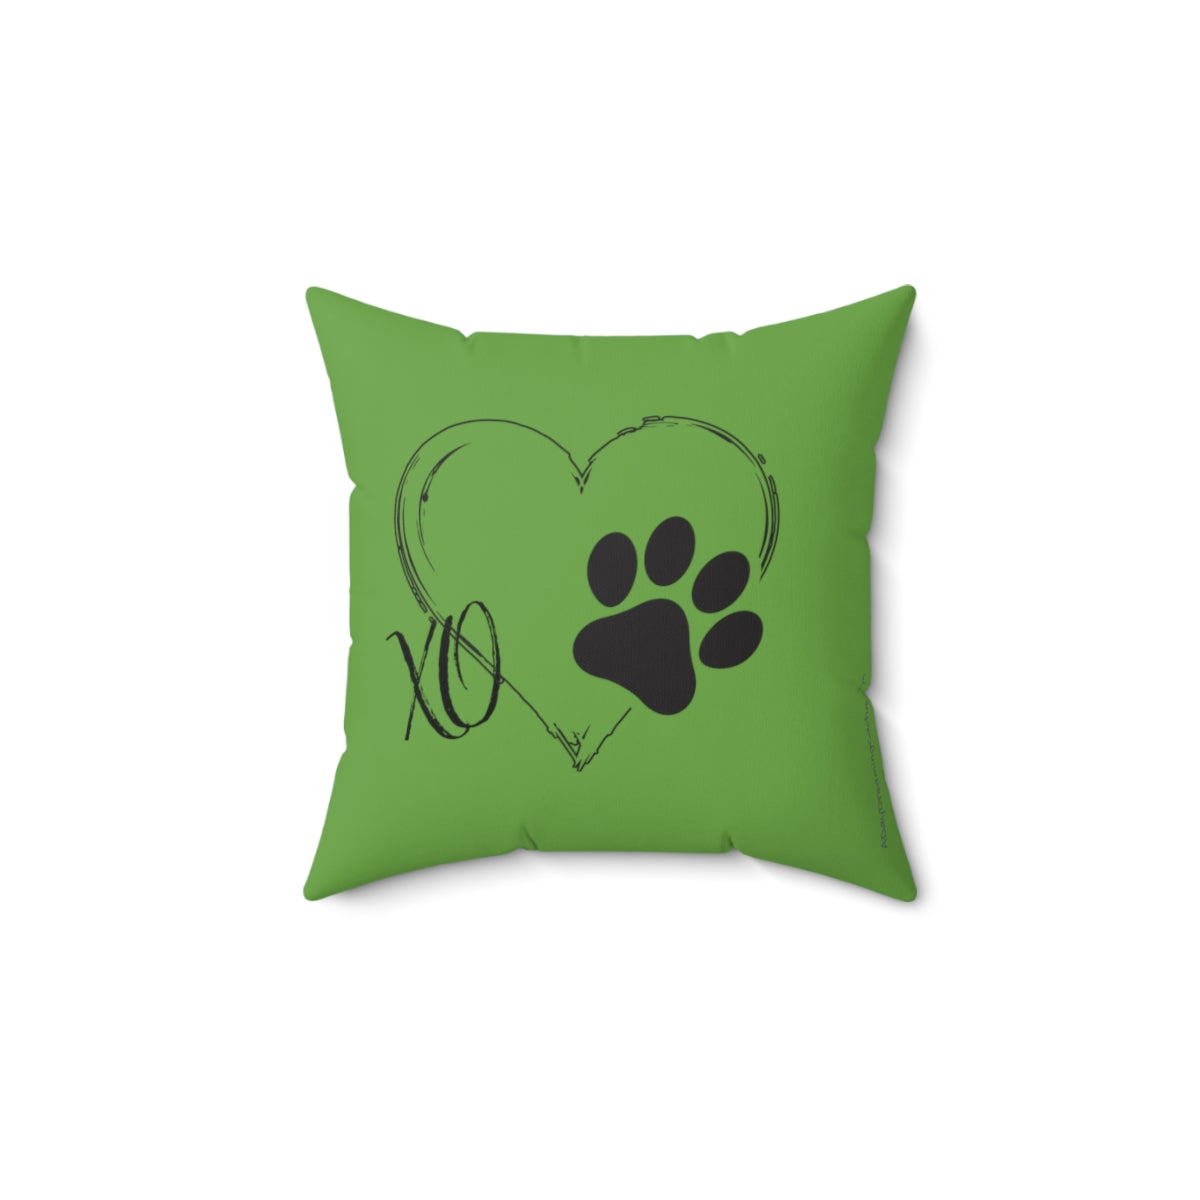 Green Square Pillow Case - Some Things Fill Your Heart Without Trying - Home Decor Pillow Cover - Accent Pillow Cover